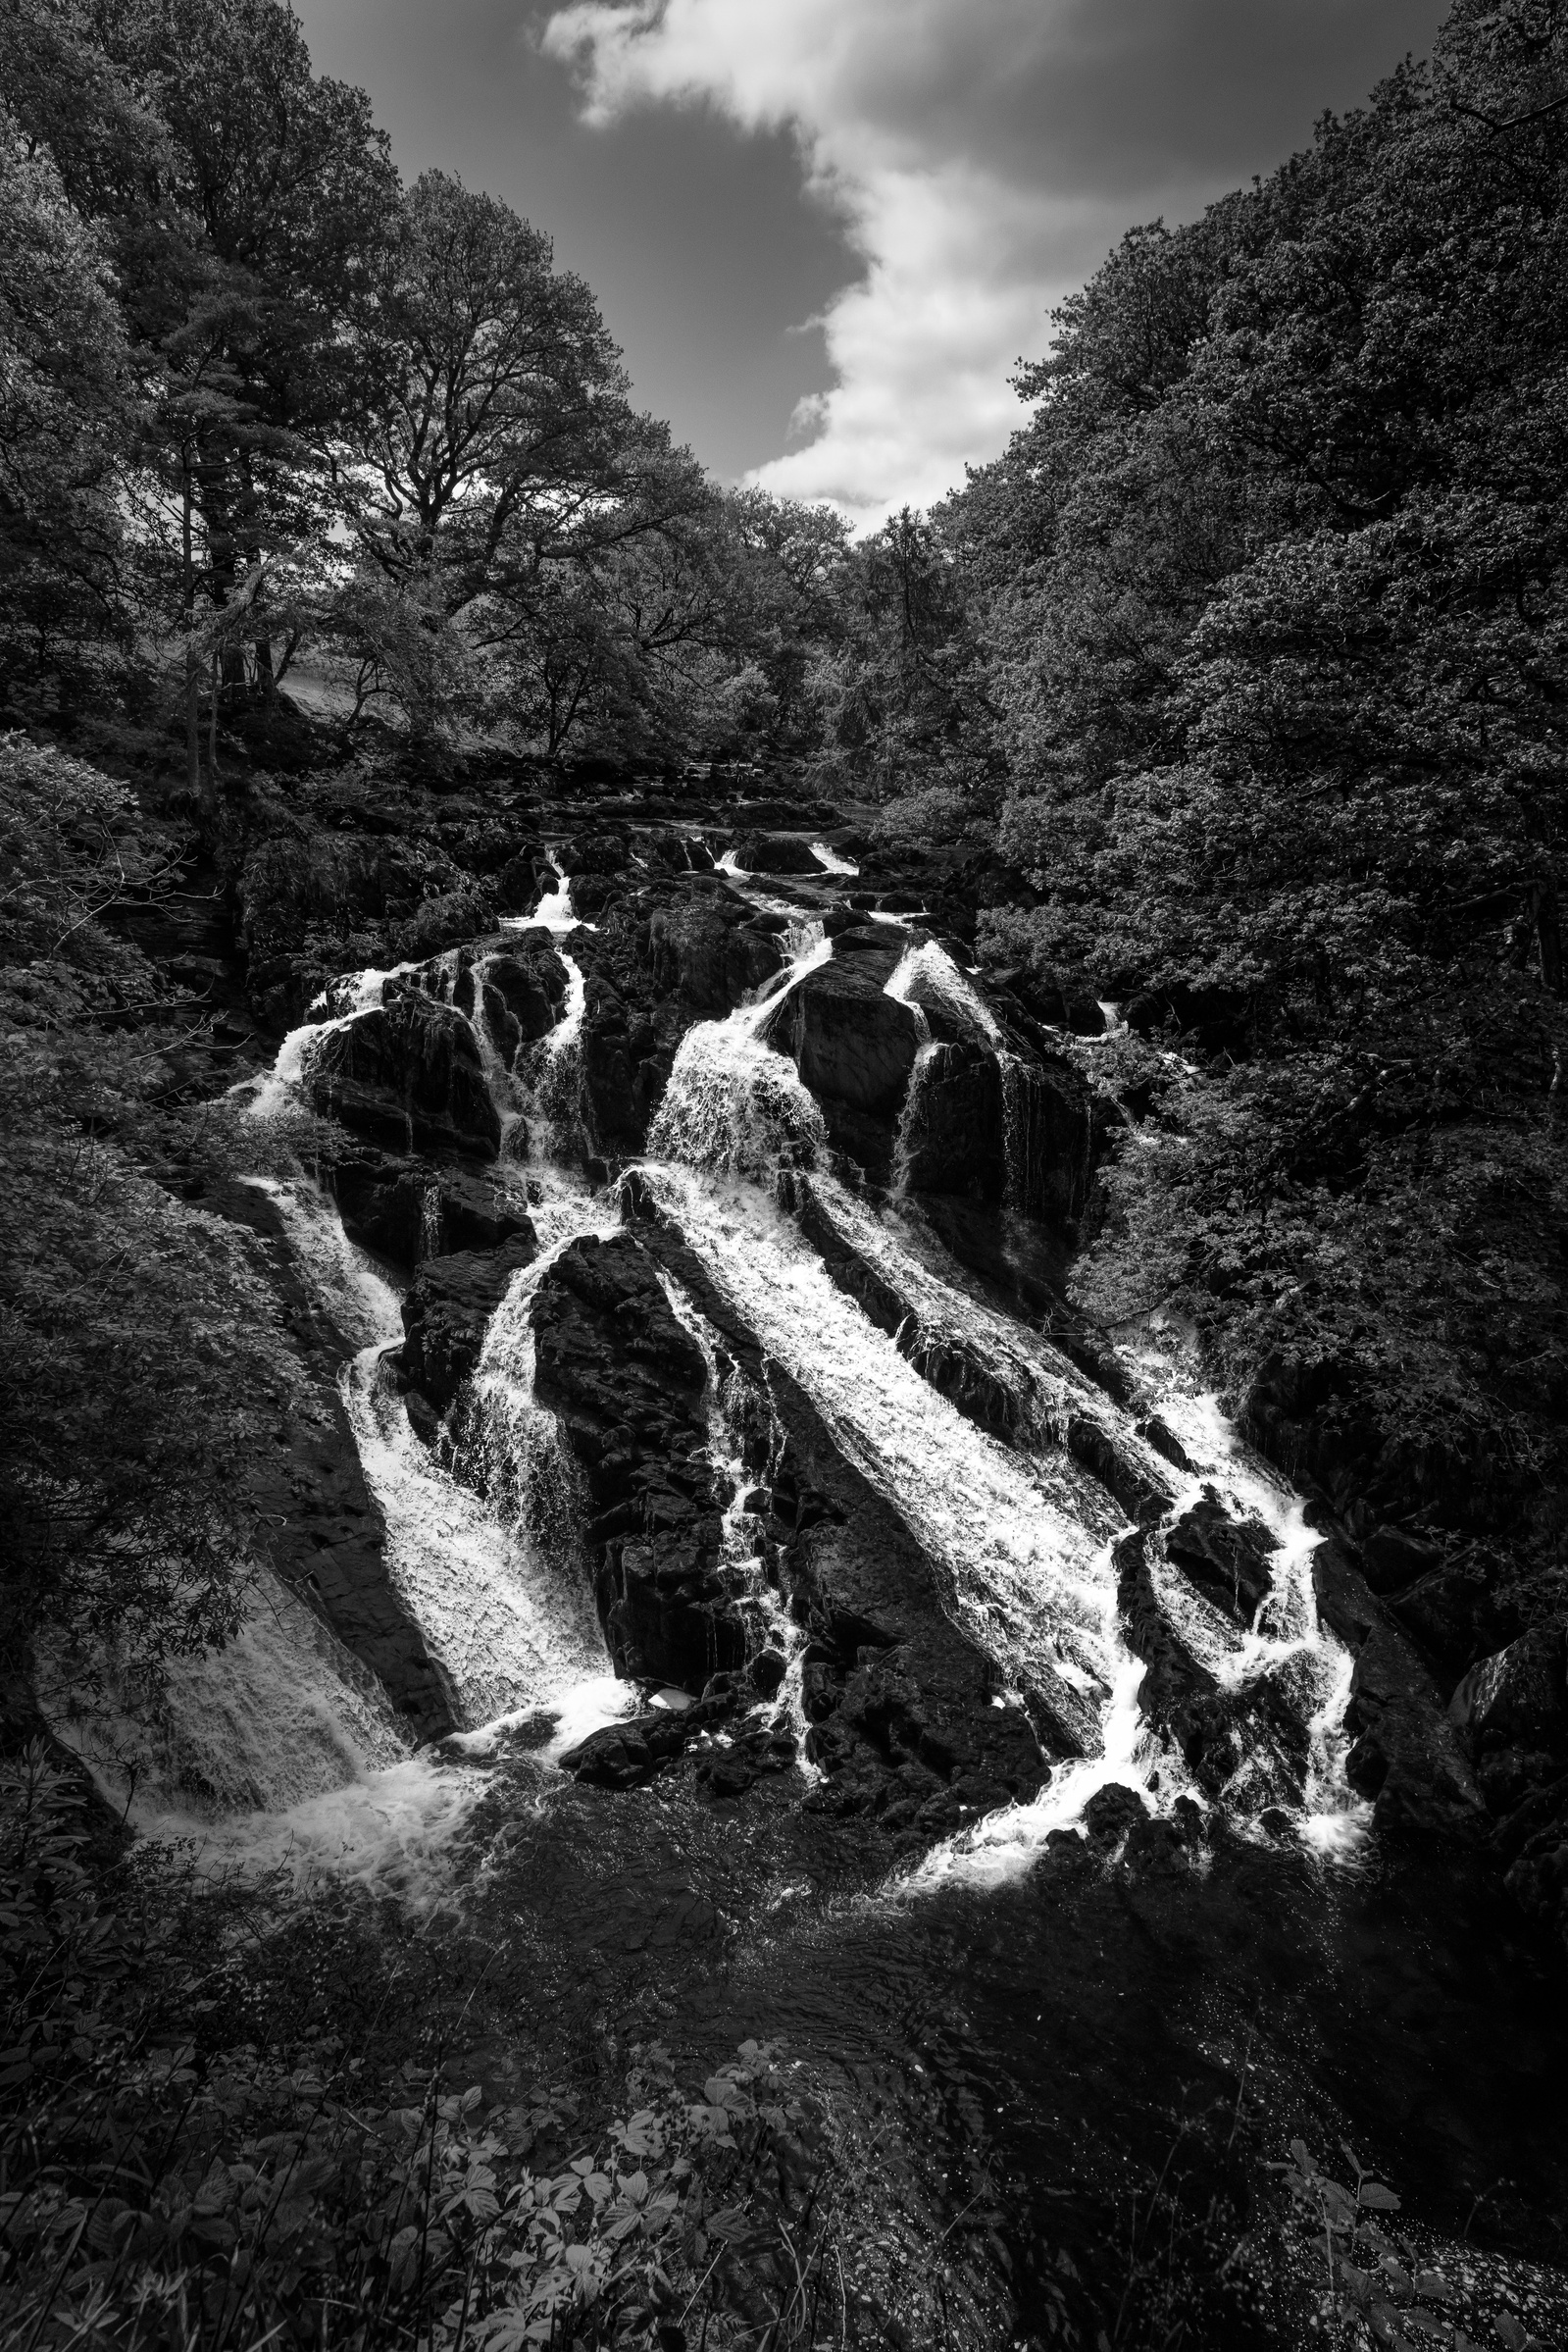 Swallow Falls in Wales, near Betws-y-Coed in Snowdonia National Park